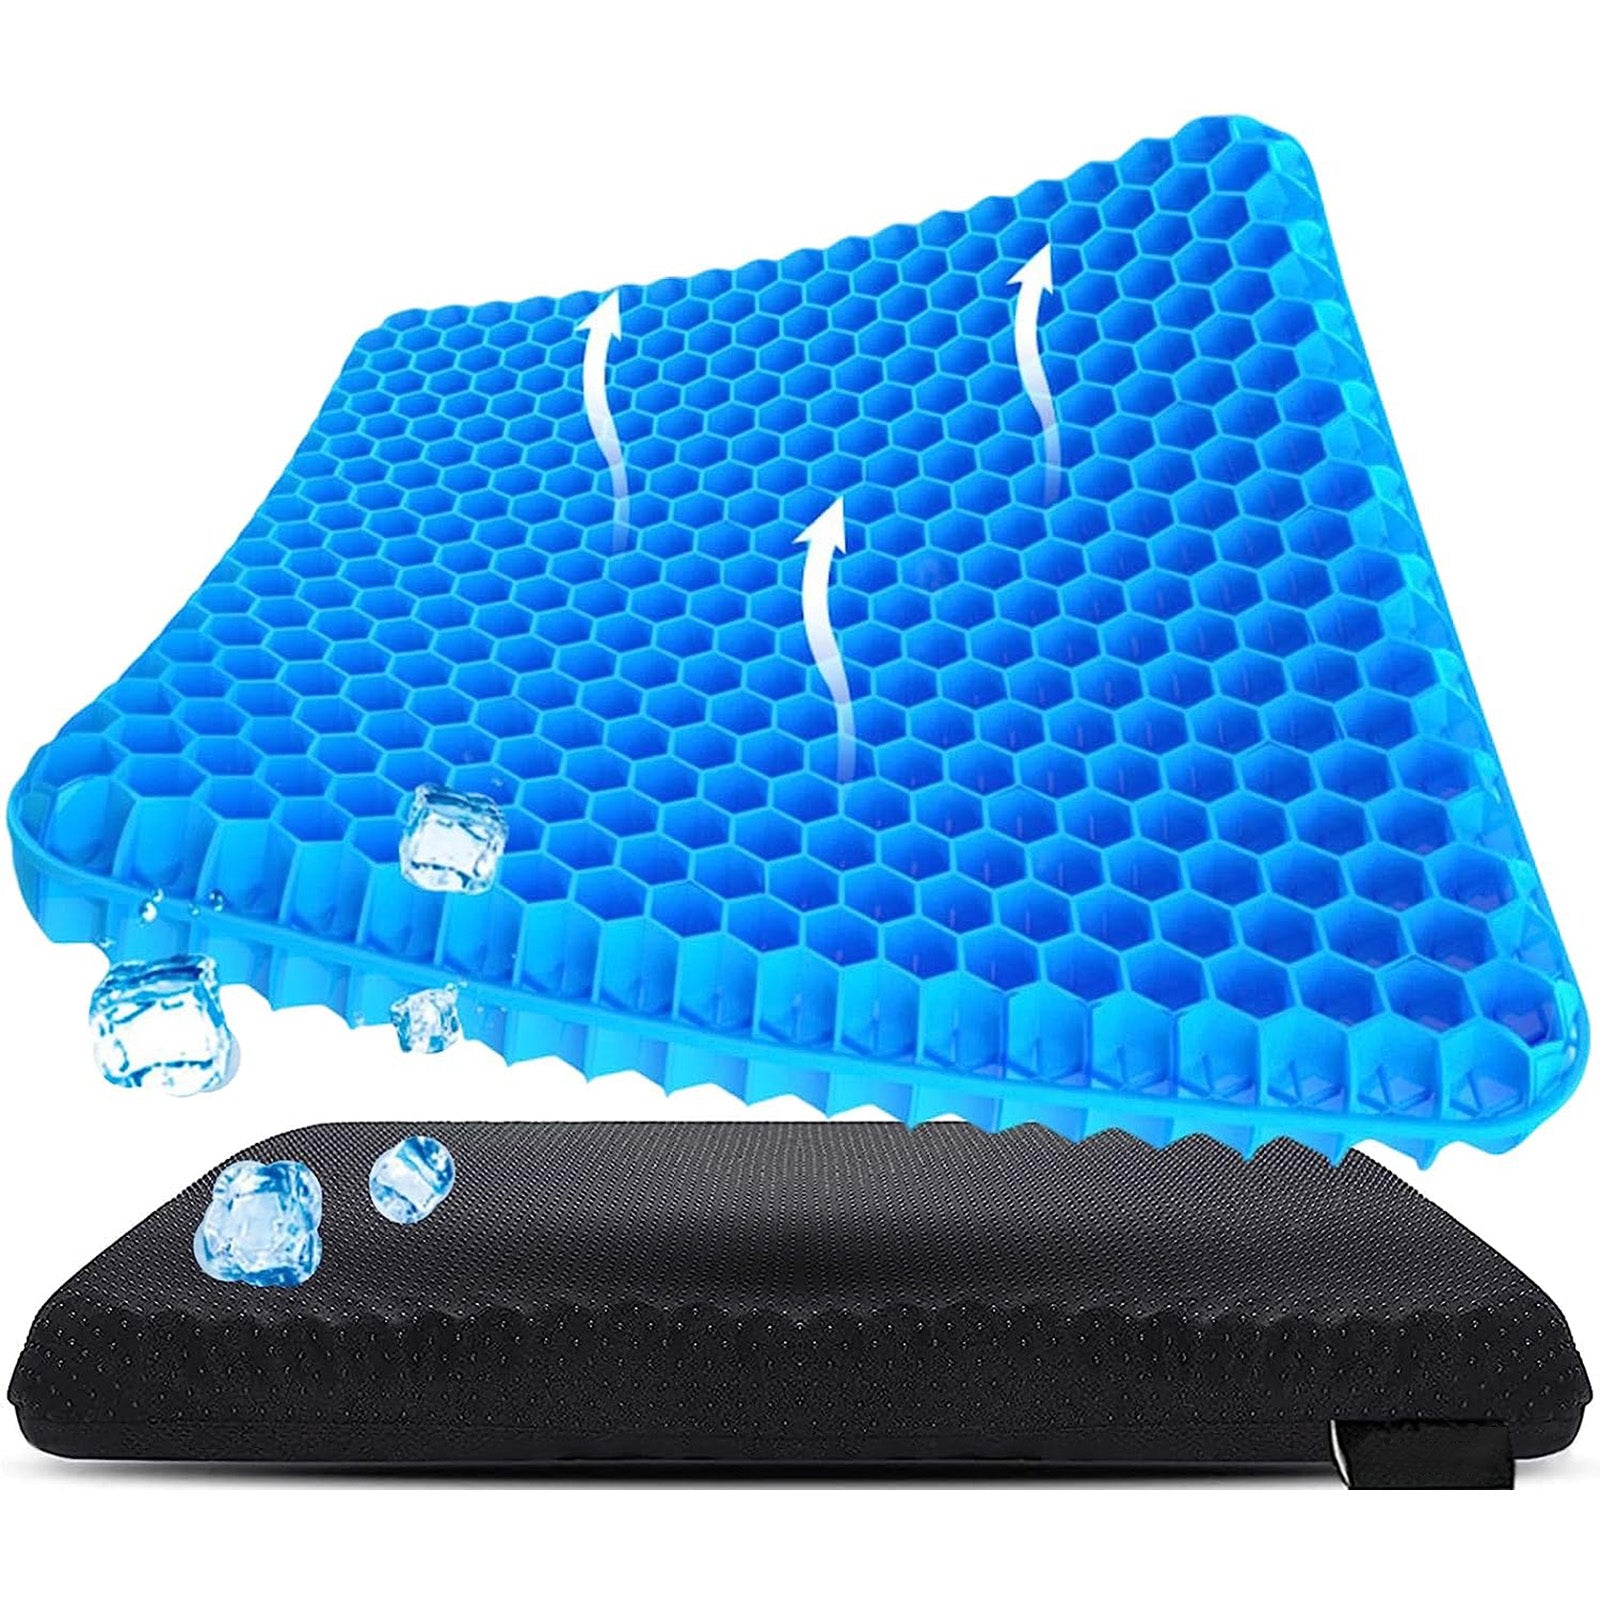 Gaming Chair Gel Seat Cushion （Stay Cool & Relieve Hip Pain）